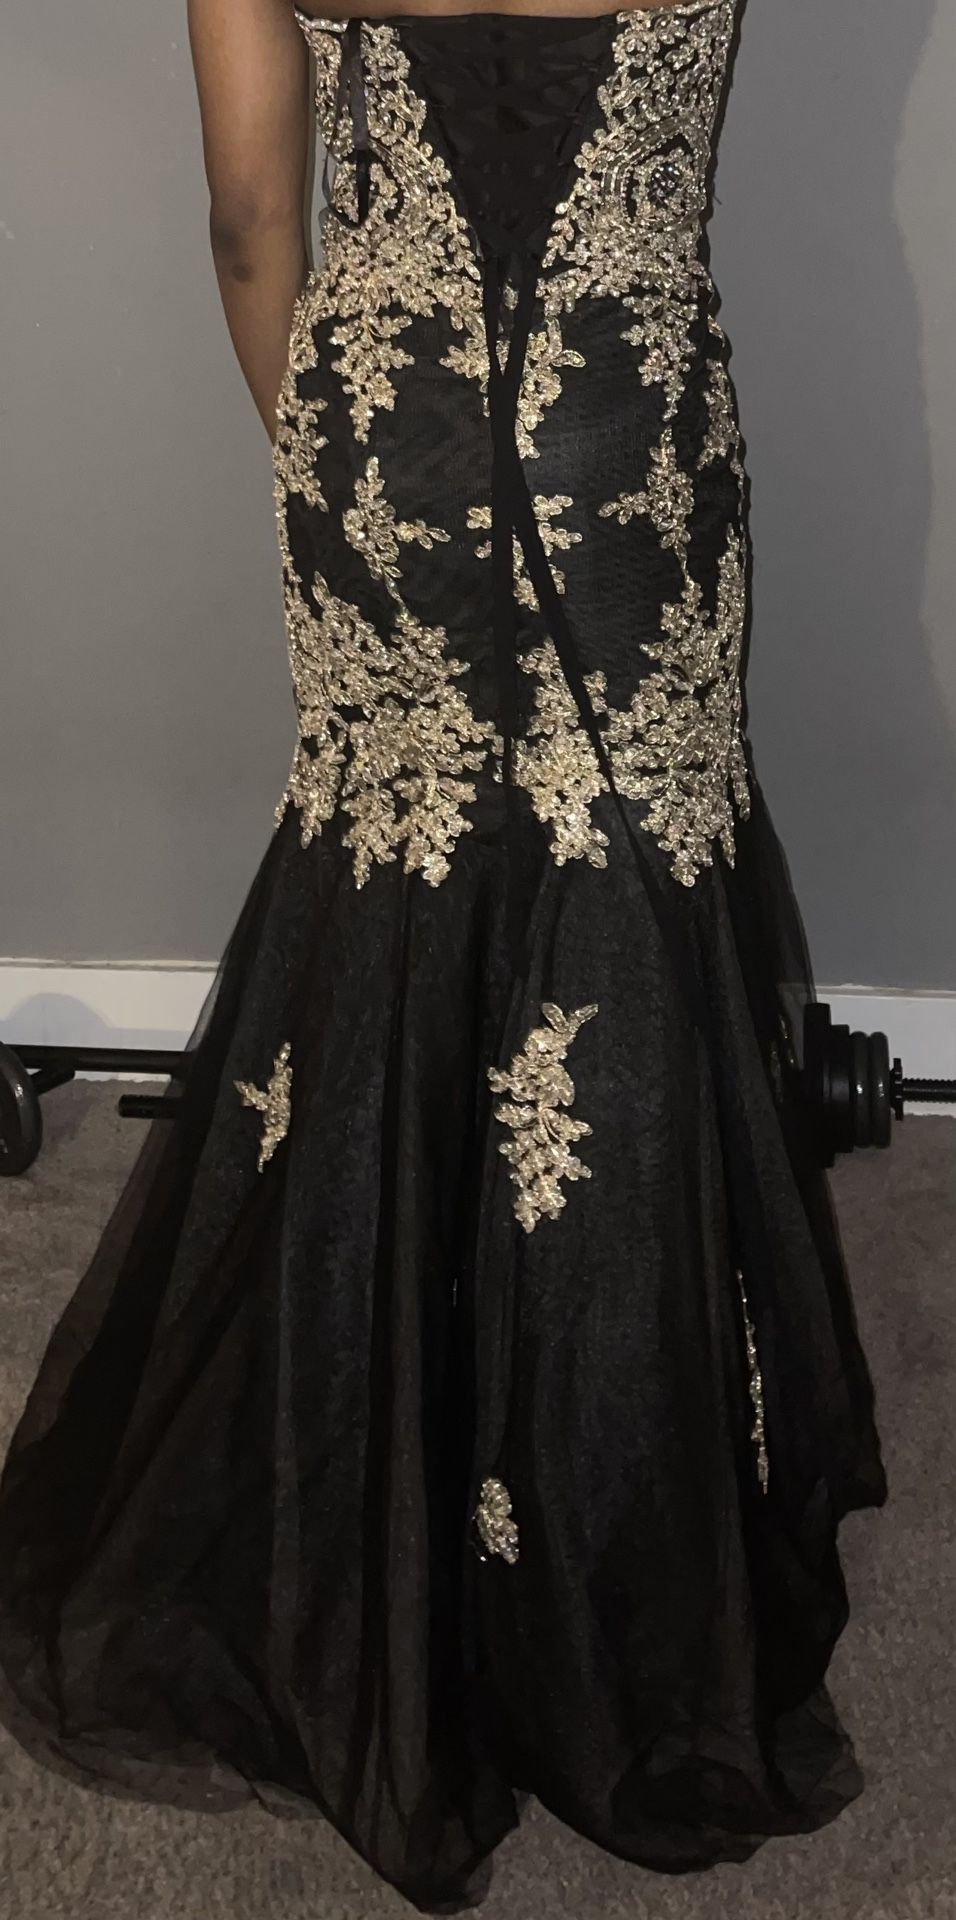 Black Prom Dress With Gold Sparkly Embroidery 